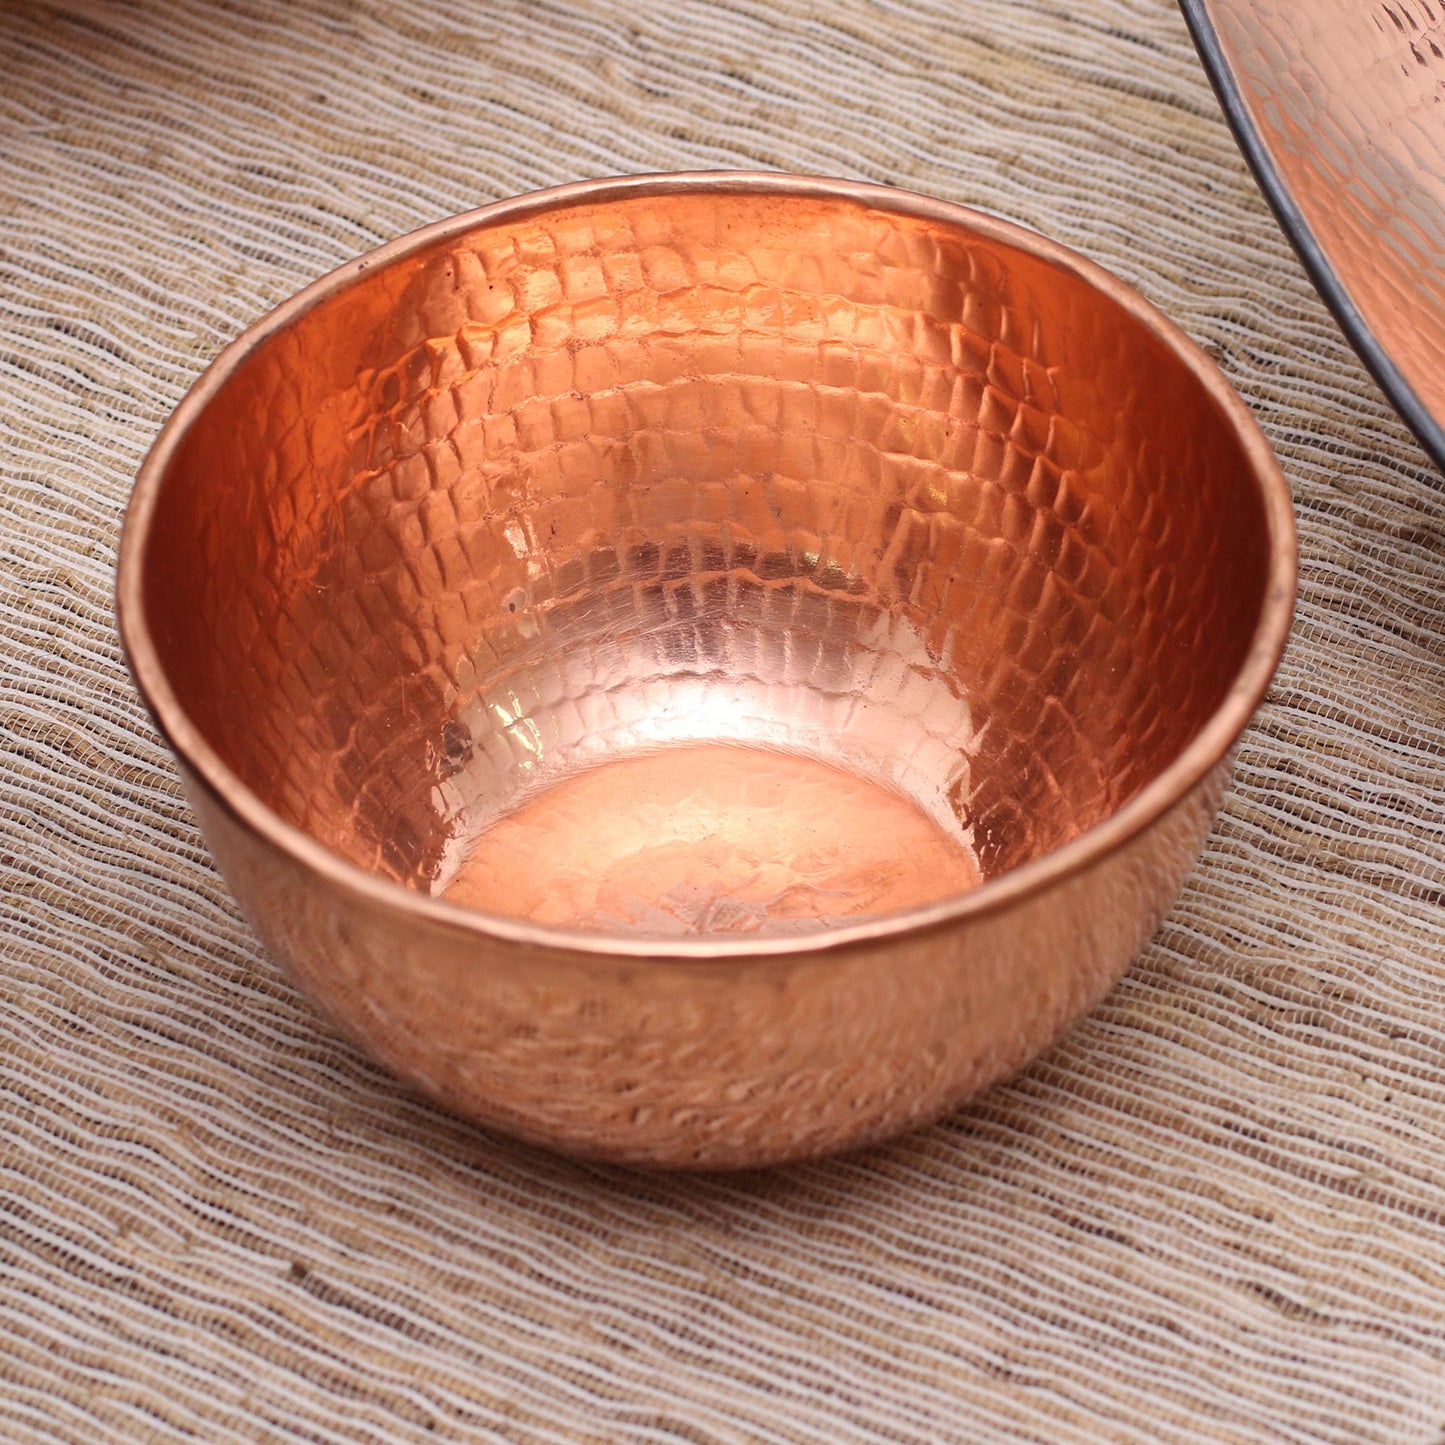 Gleaming Meal Hammered Copper Bowl Handcrafted in Bali